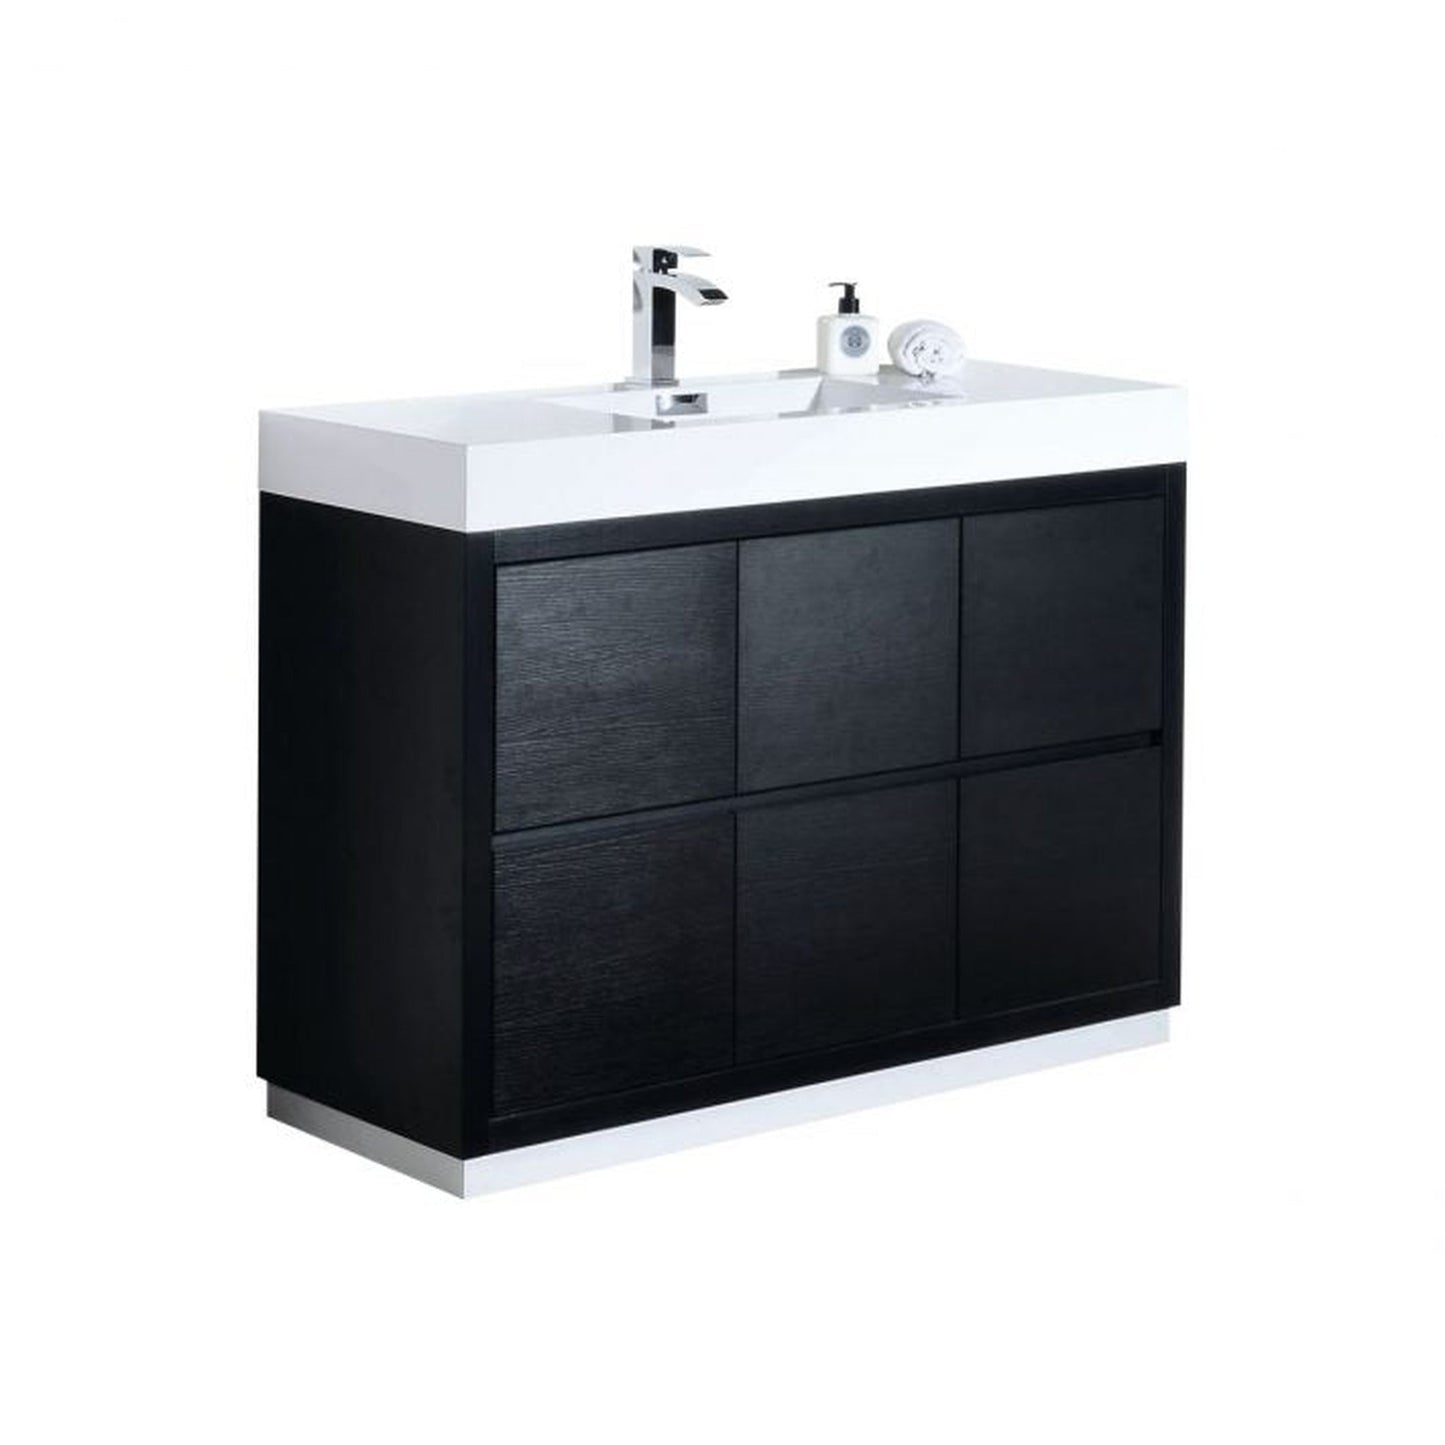 KubeBath Bliss 48" Black Freestanding Modern Bathroom Vanity With Single Integrated Acrylic Sink With Overflow and 44" Black Framed Mirror With Shelf